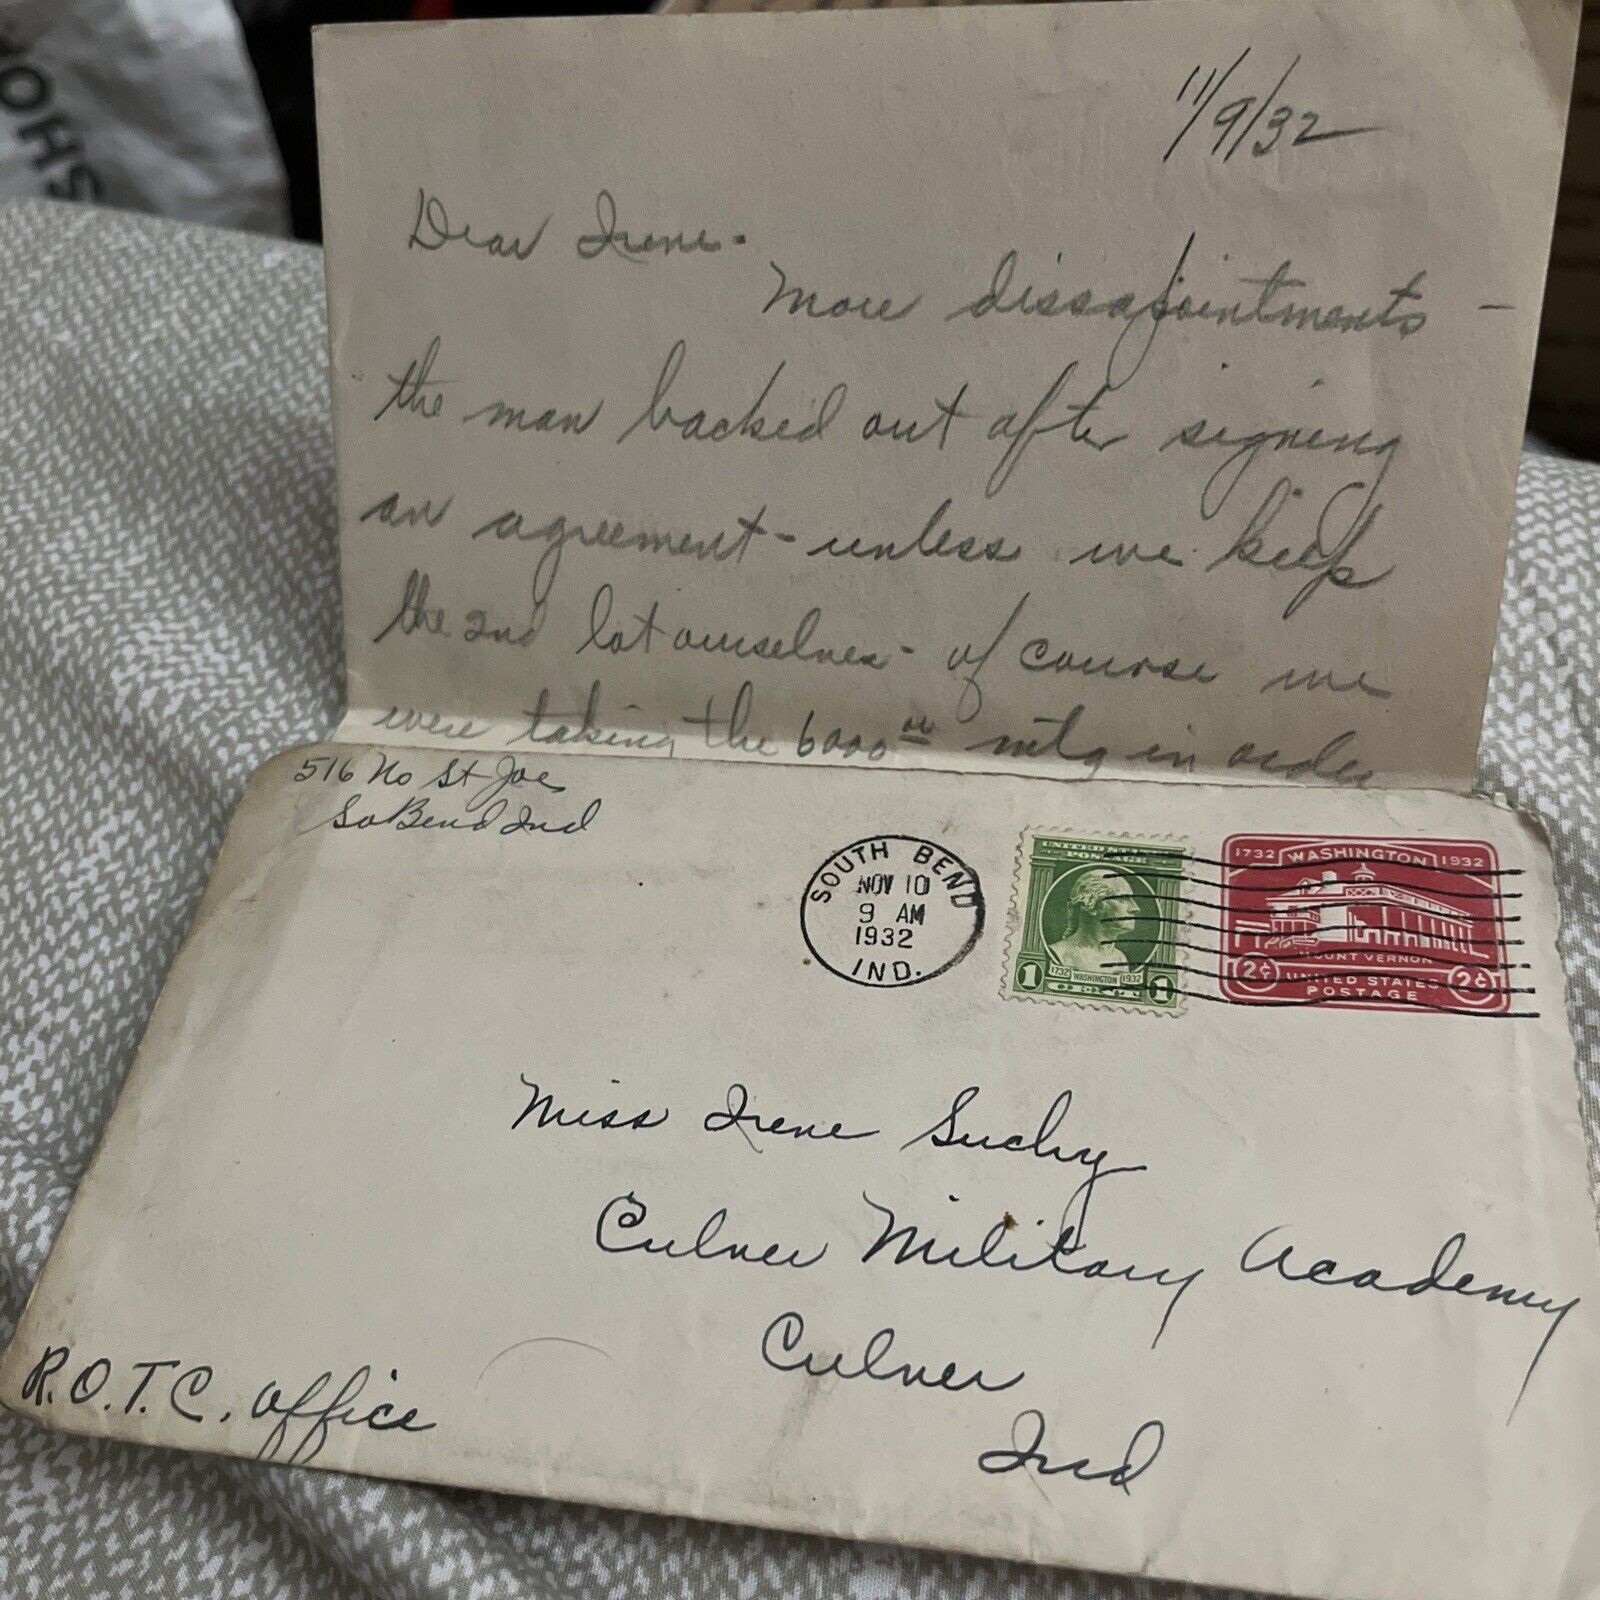 1932 Great Depression Letter to ROTC Office:  Real Estate Business Troubles